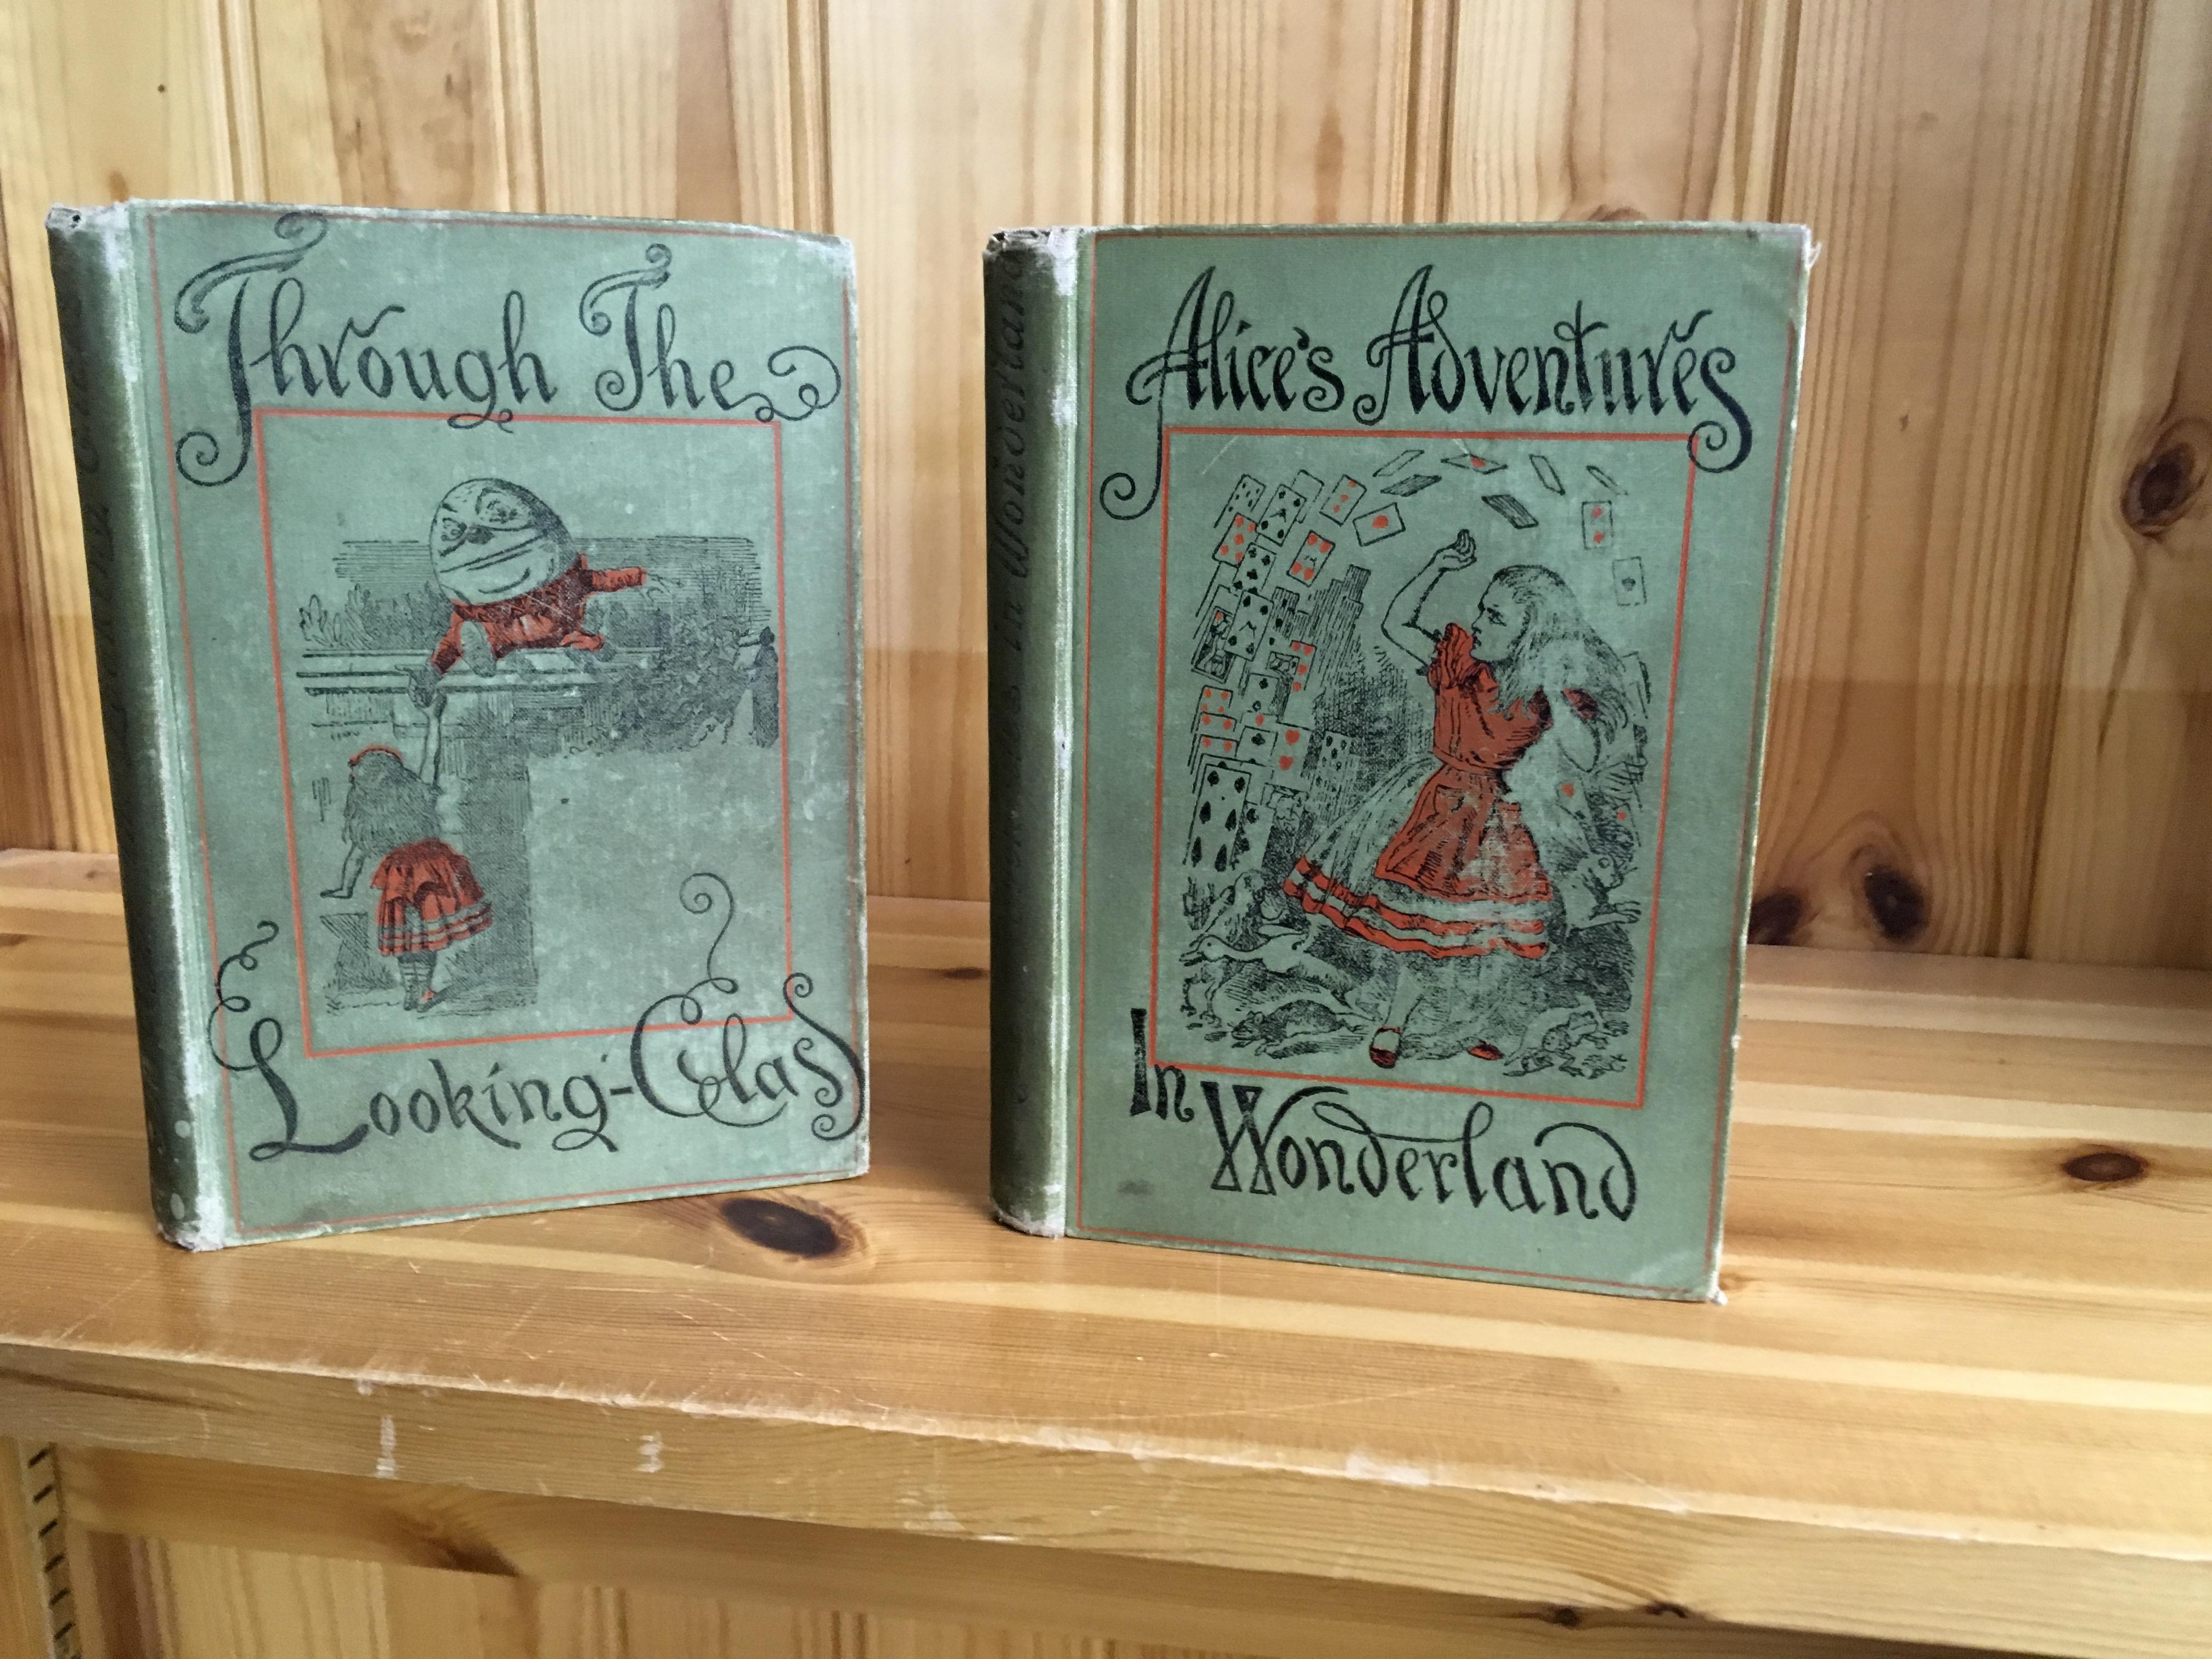 Carroll (Lewis) Copies of Through the looking glass and also Alice's adventures in Wonderland.